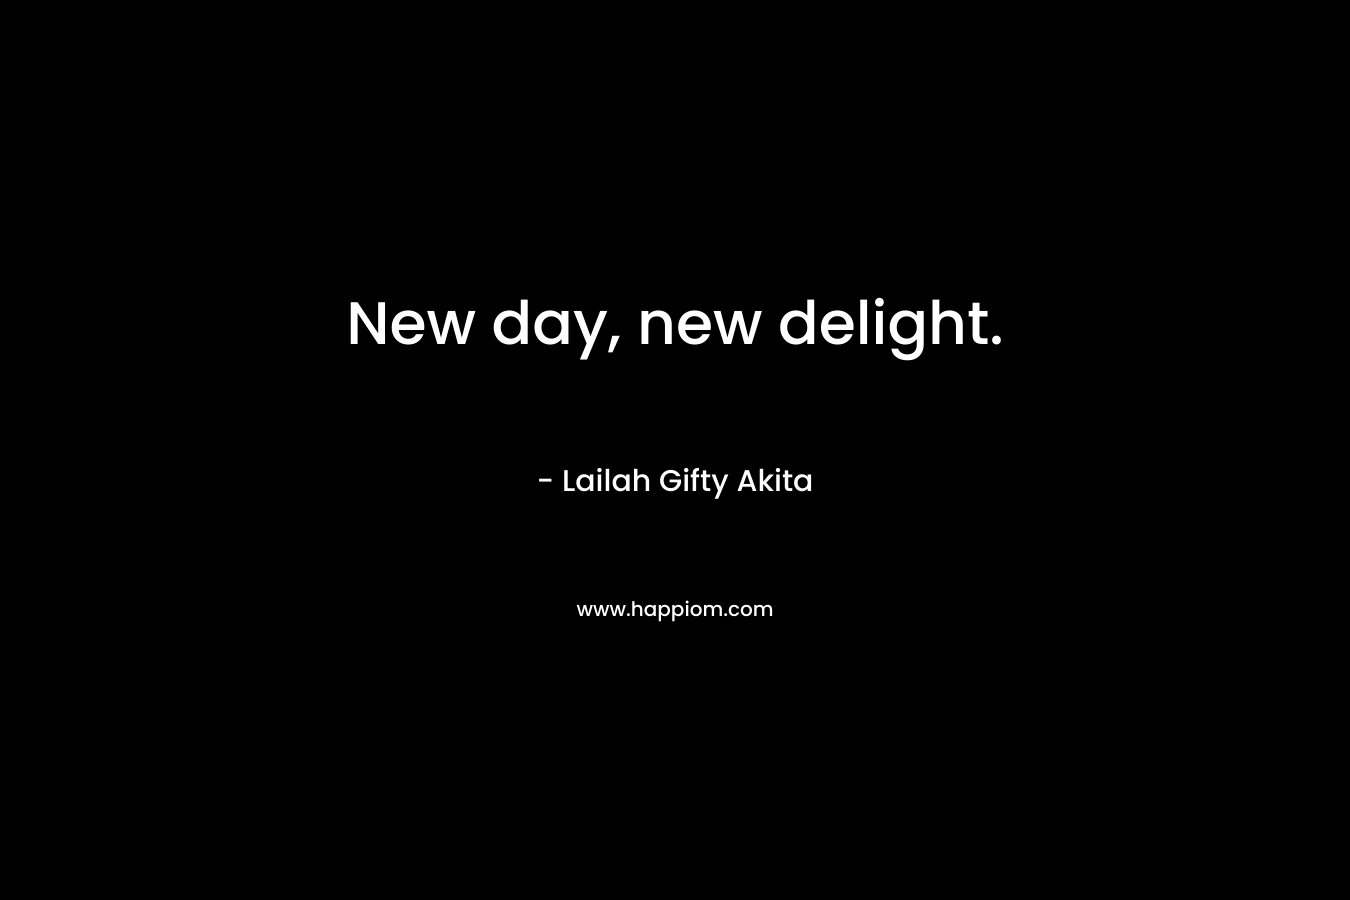 New day, new delight.